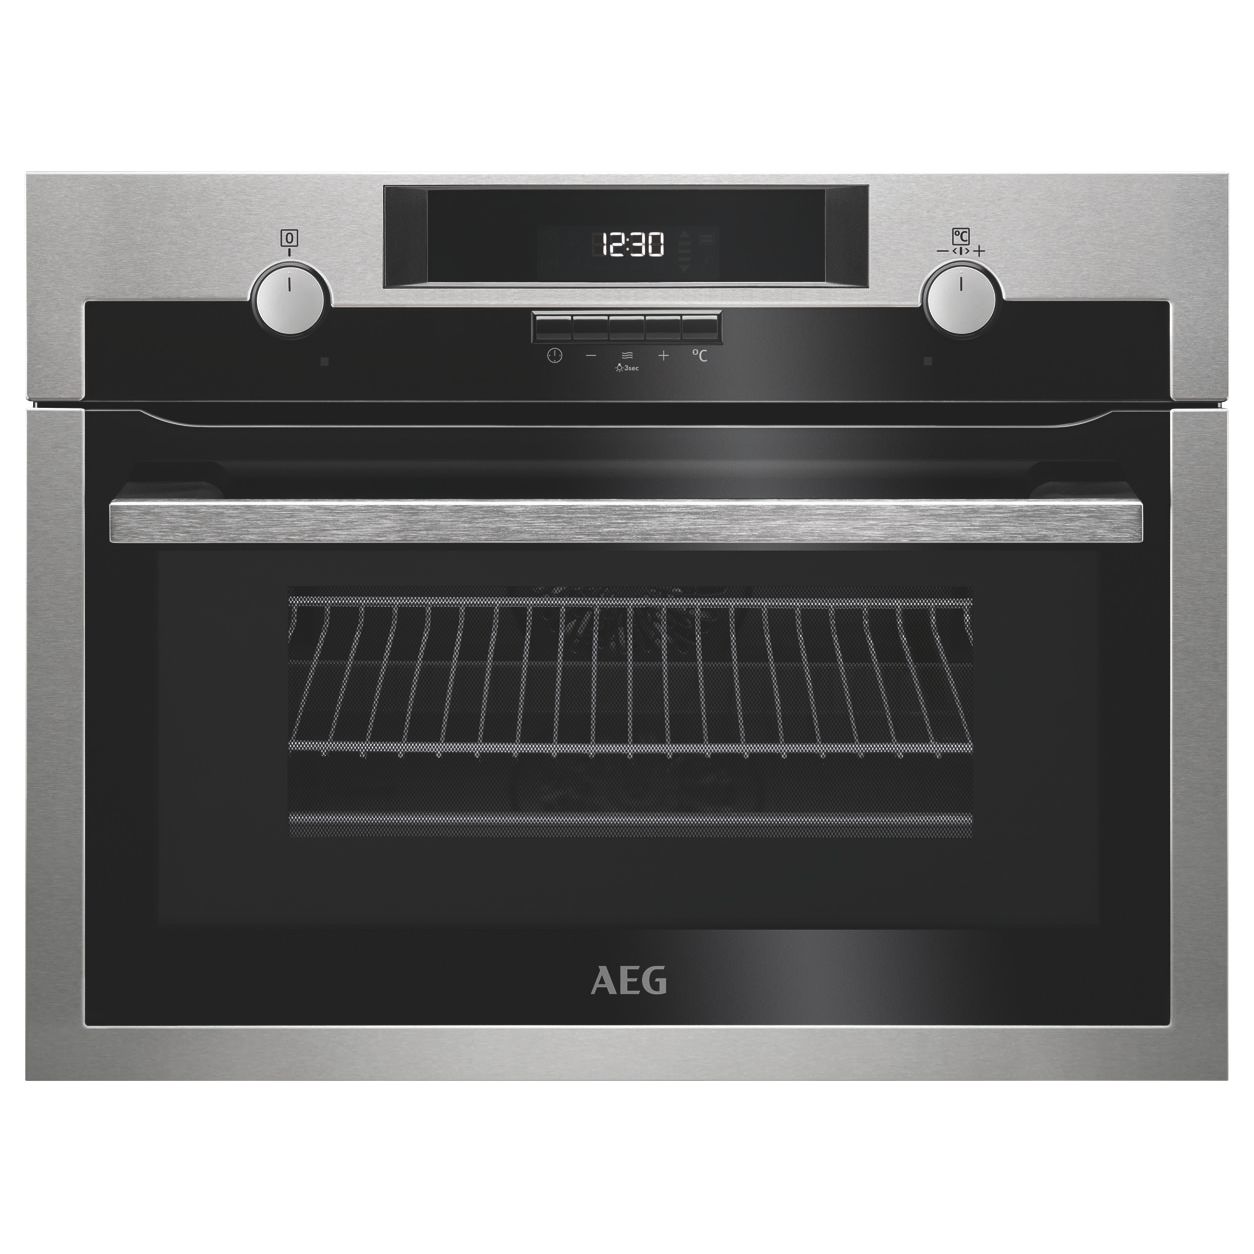 AEG KME561000M CombiQuick Compact Built-In Oven with Microwave, Stainless Steel